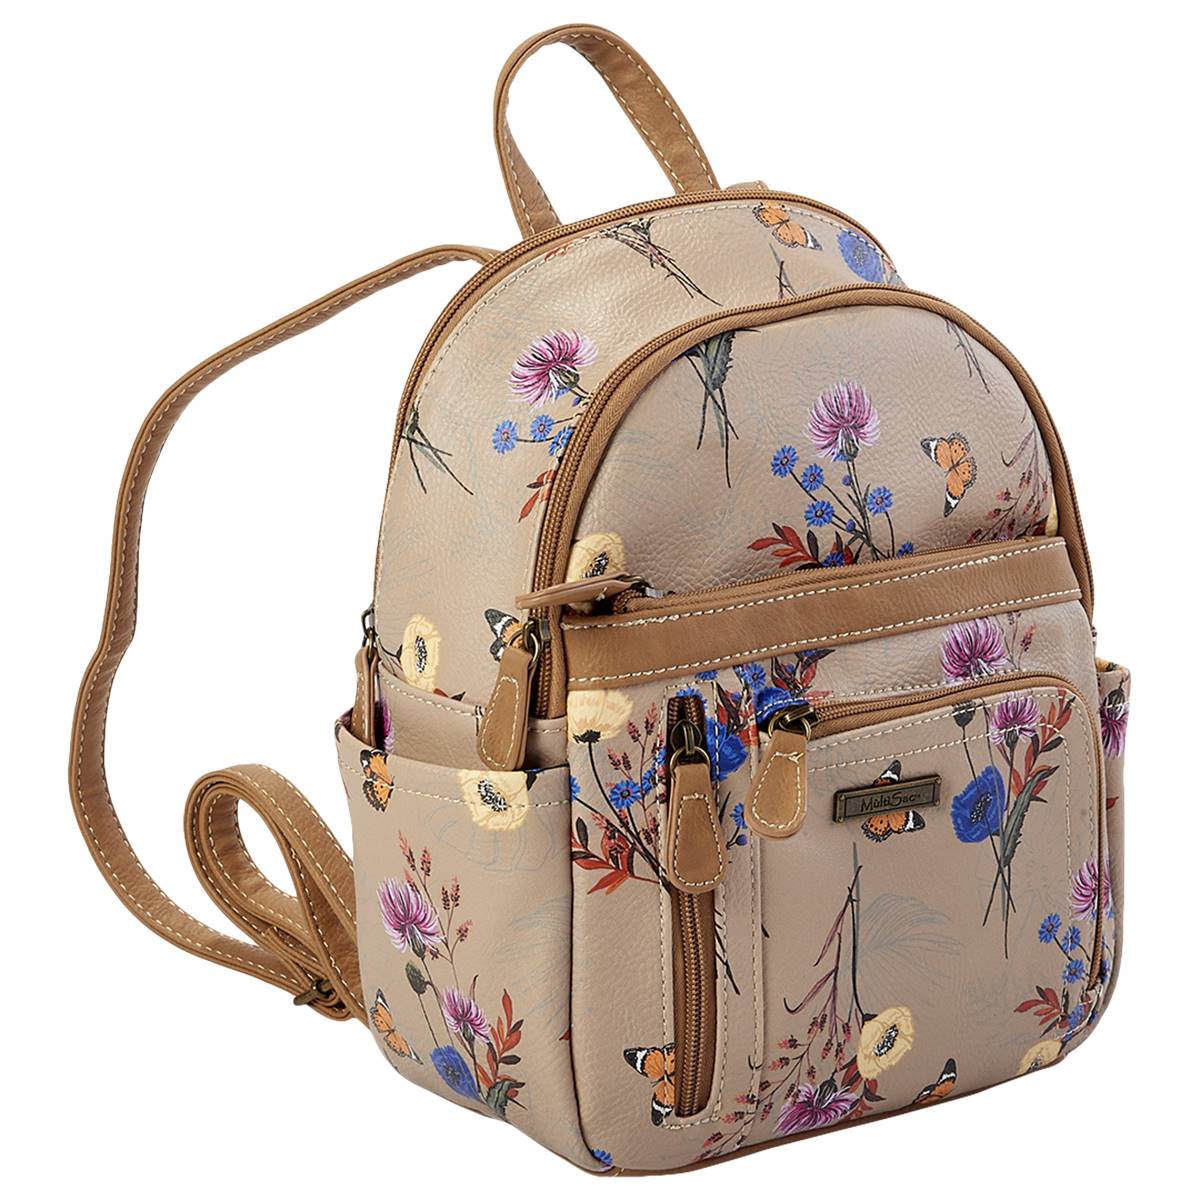 MultiSac Adele Floral Butterfly Backpack